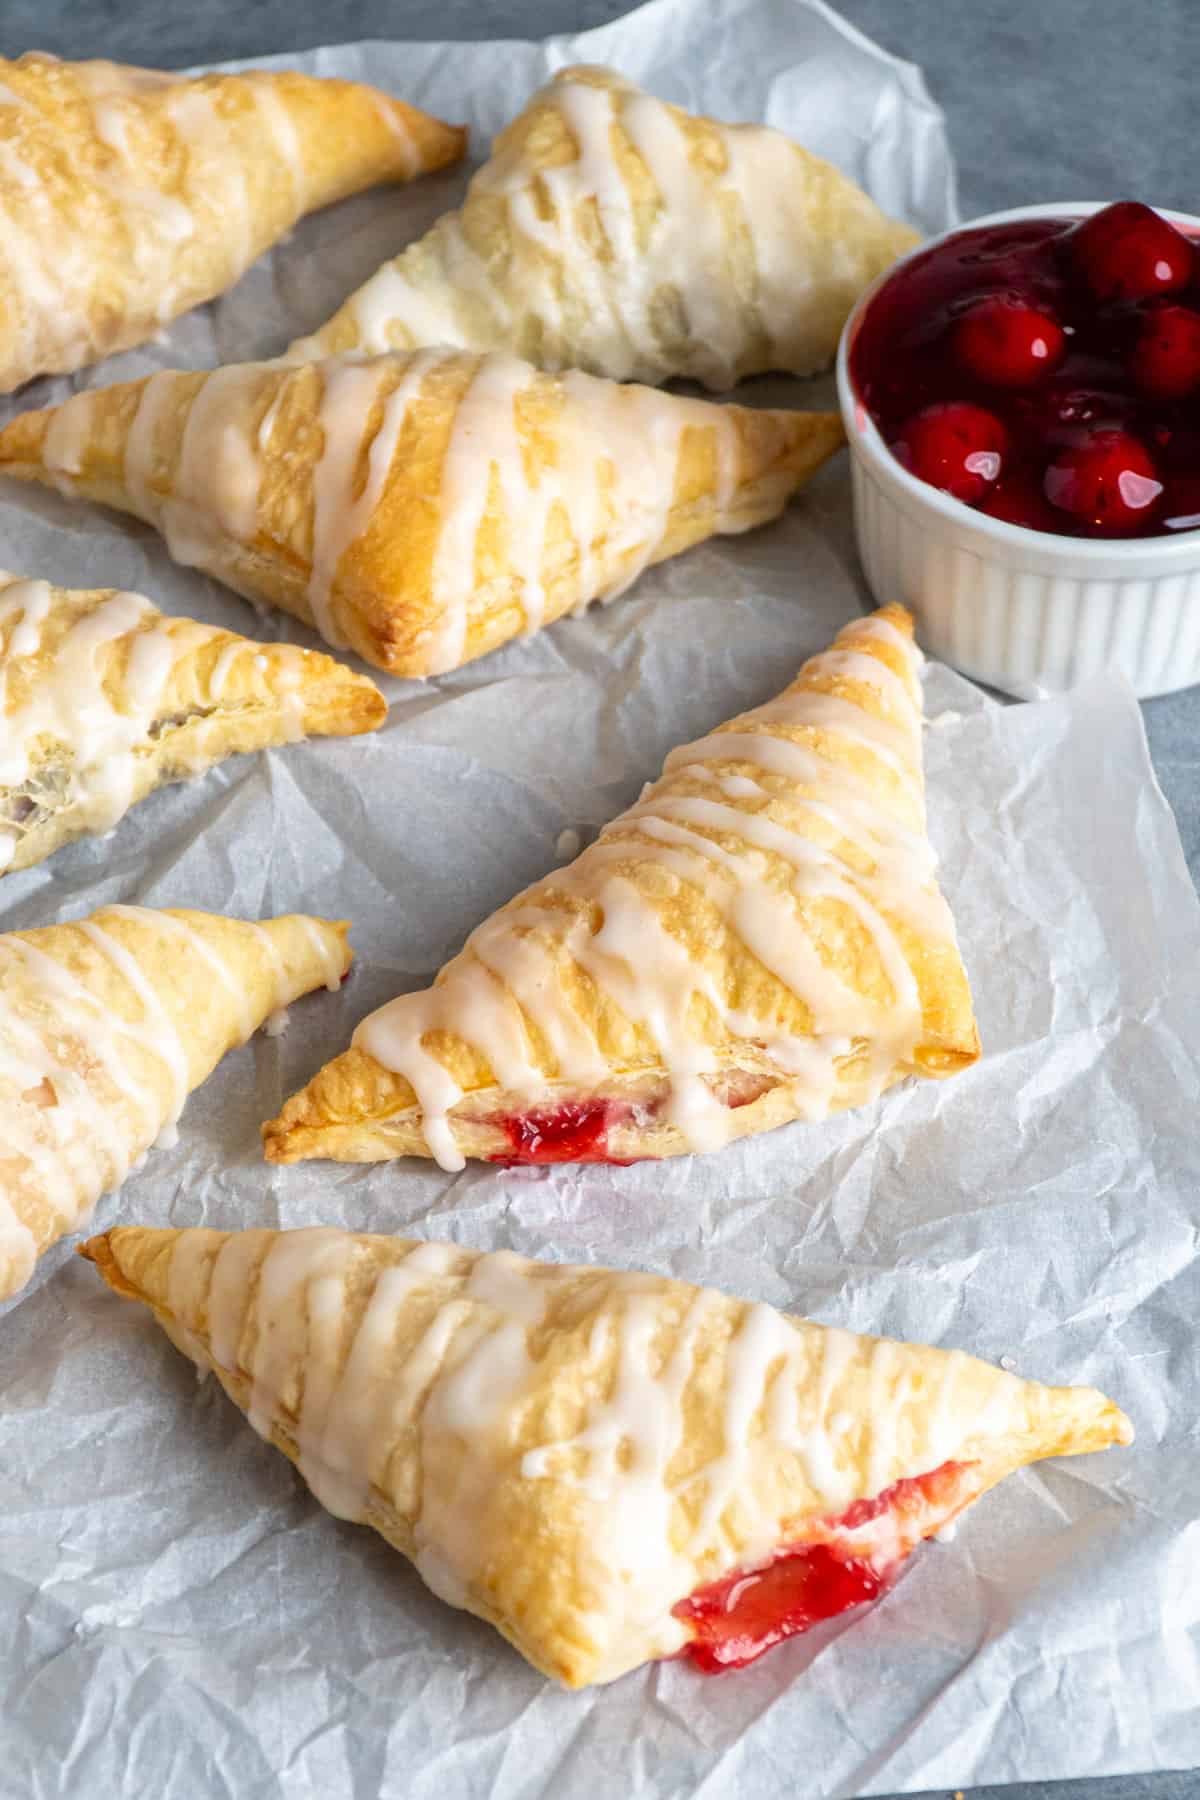 Homemade puff pastry turnovers on parchment paper.